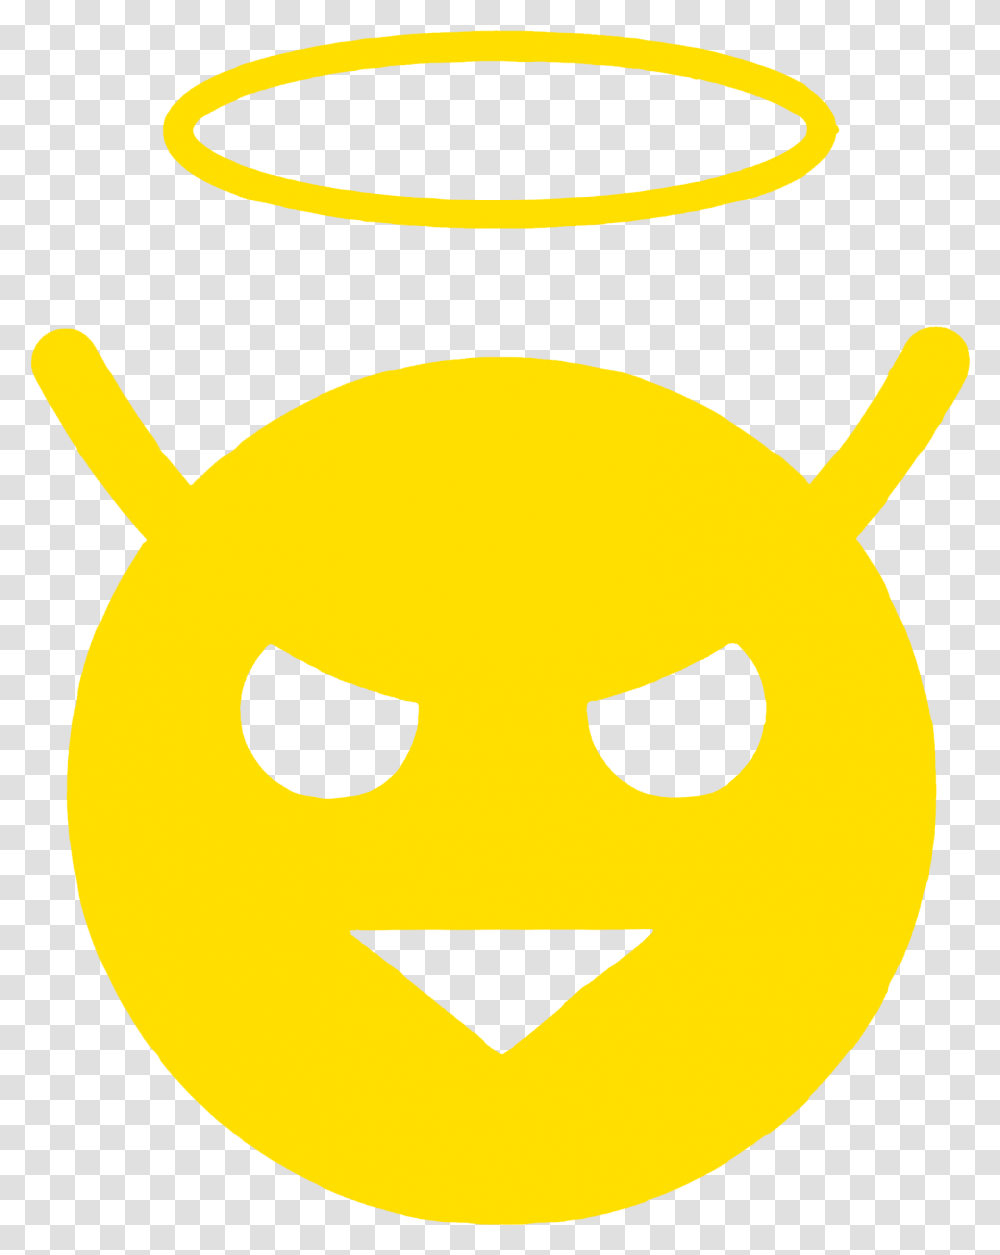 Company Introduced A New Logo And Mascot Poco New Logo, Pac Man, Halloween, Pillow, Cushion Transparent Png